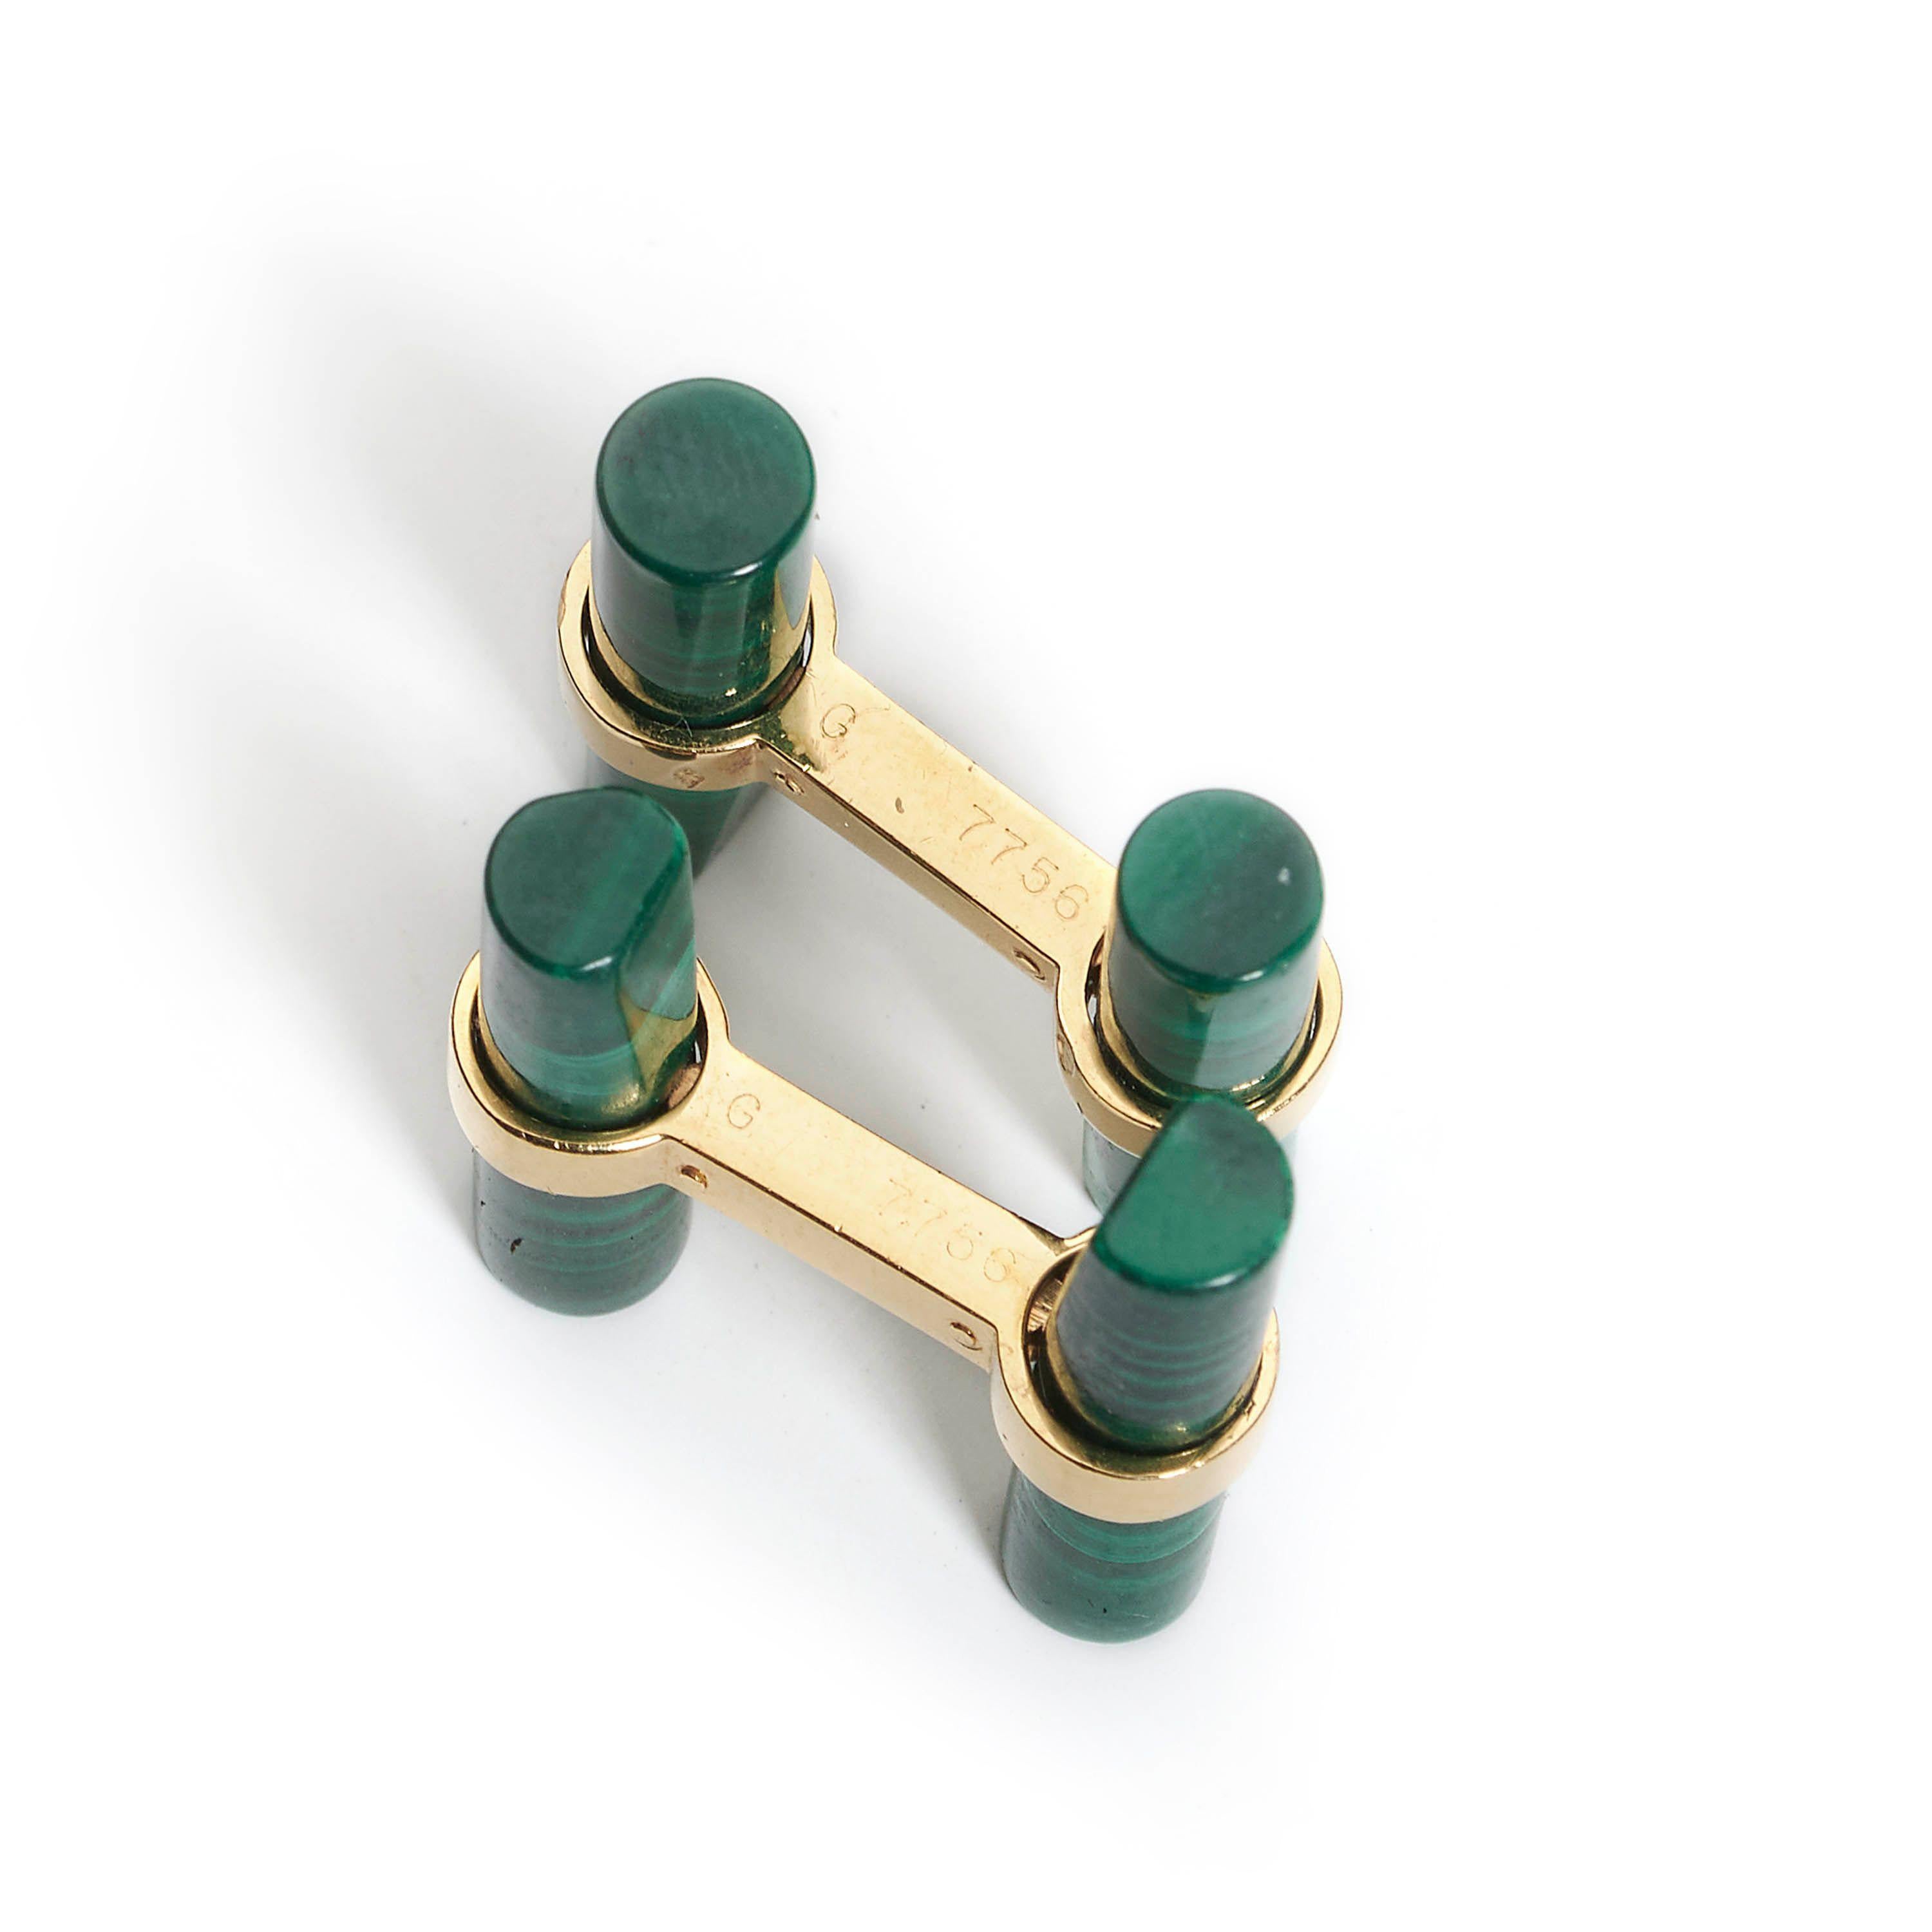 Cartier Paris Cufflink Set, with Multiple Gemstone Batons, Circa 1985 In Good Condition For Sale In London, GB